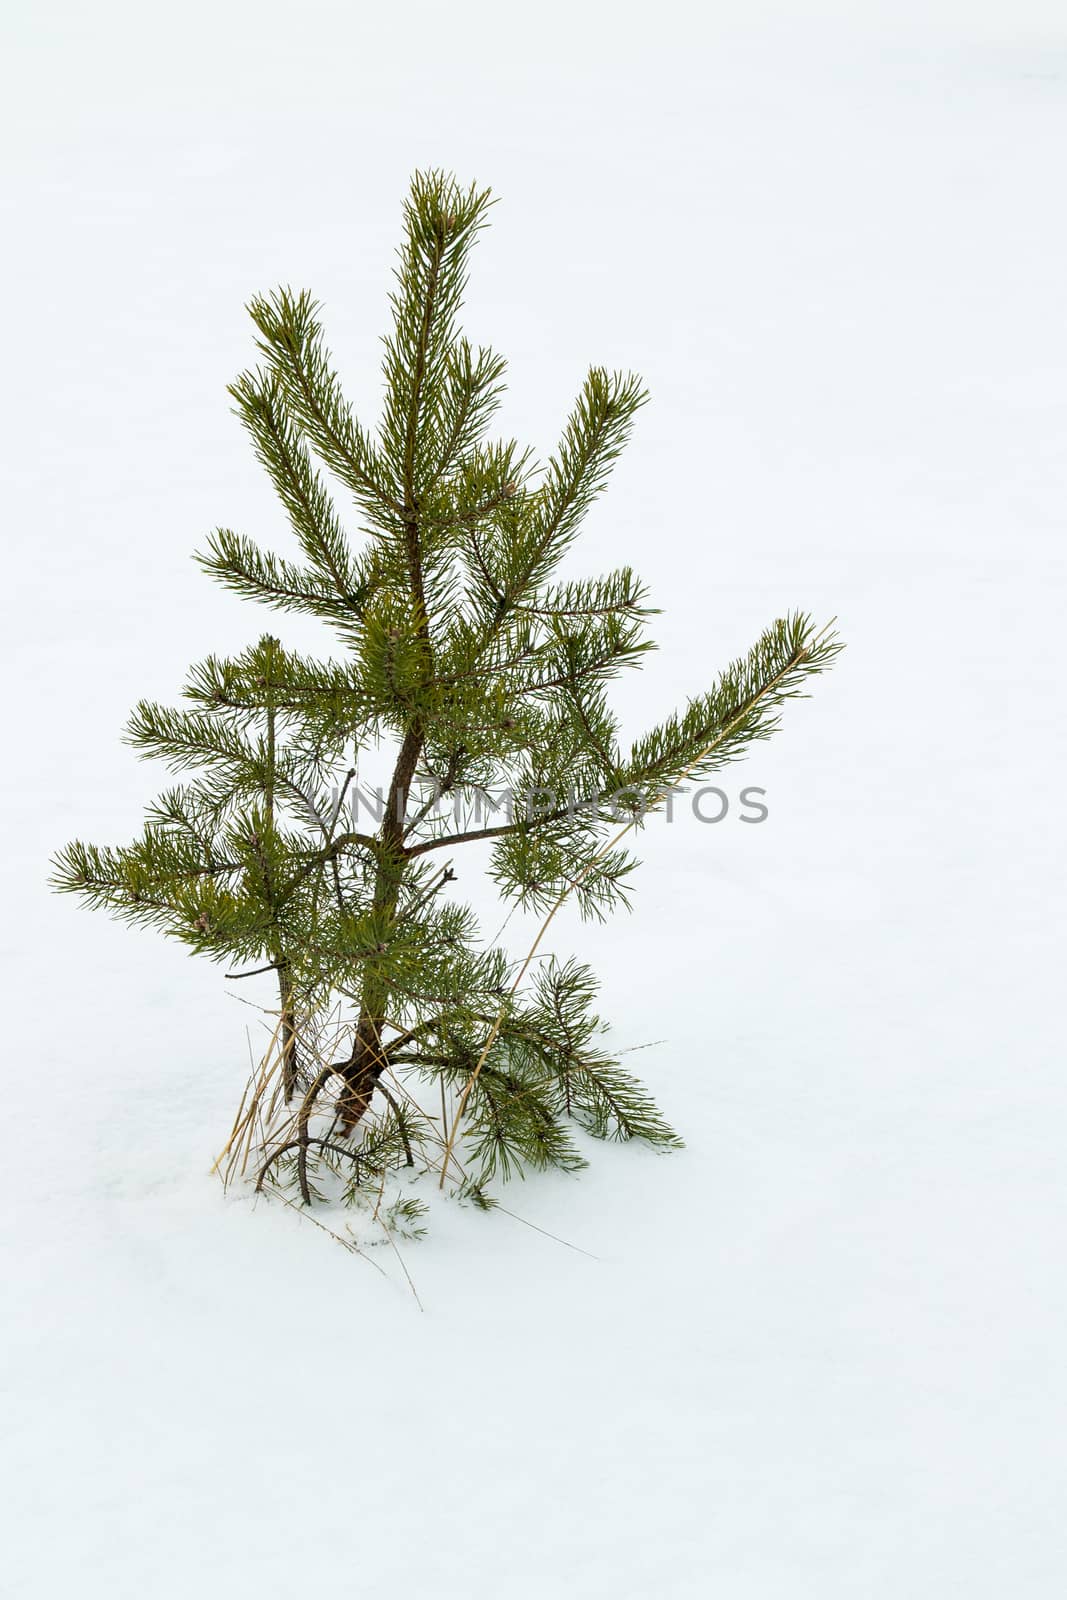 Pine plant growing on white snow by Alexanderphoto